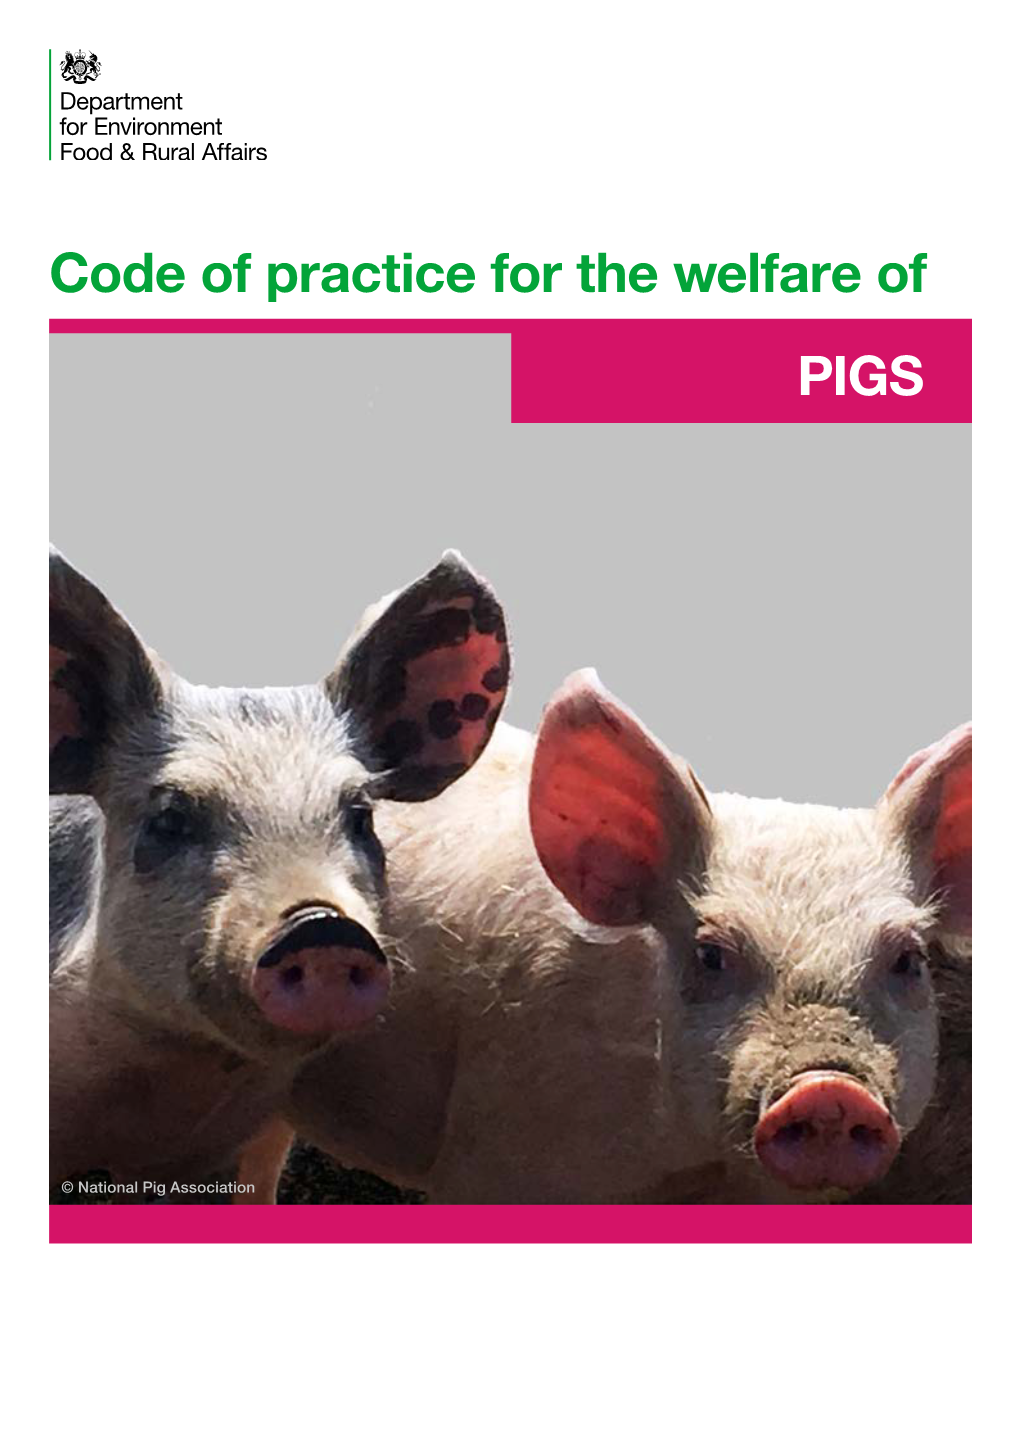 Code of Practice for the Welfare of PIGS